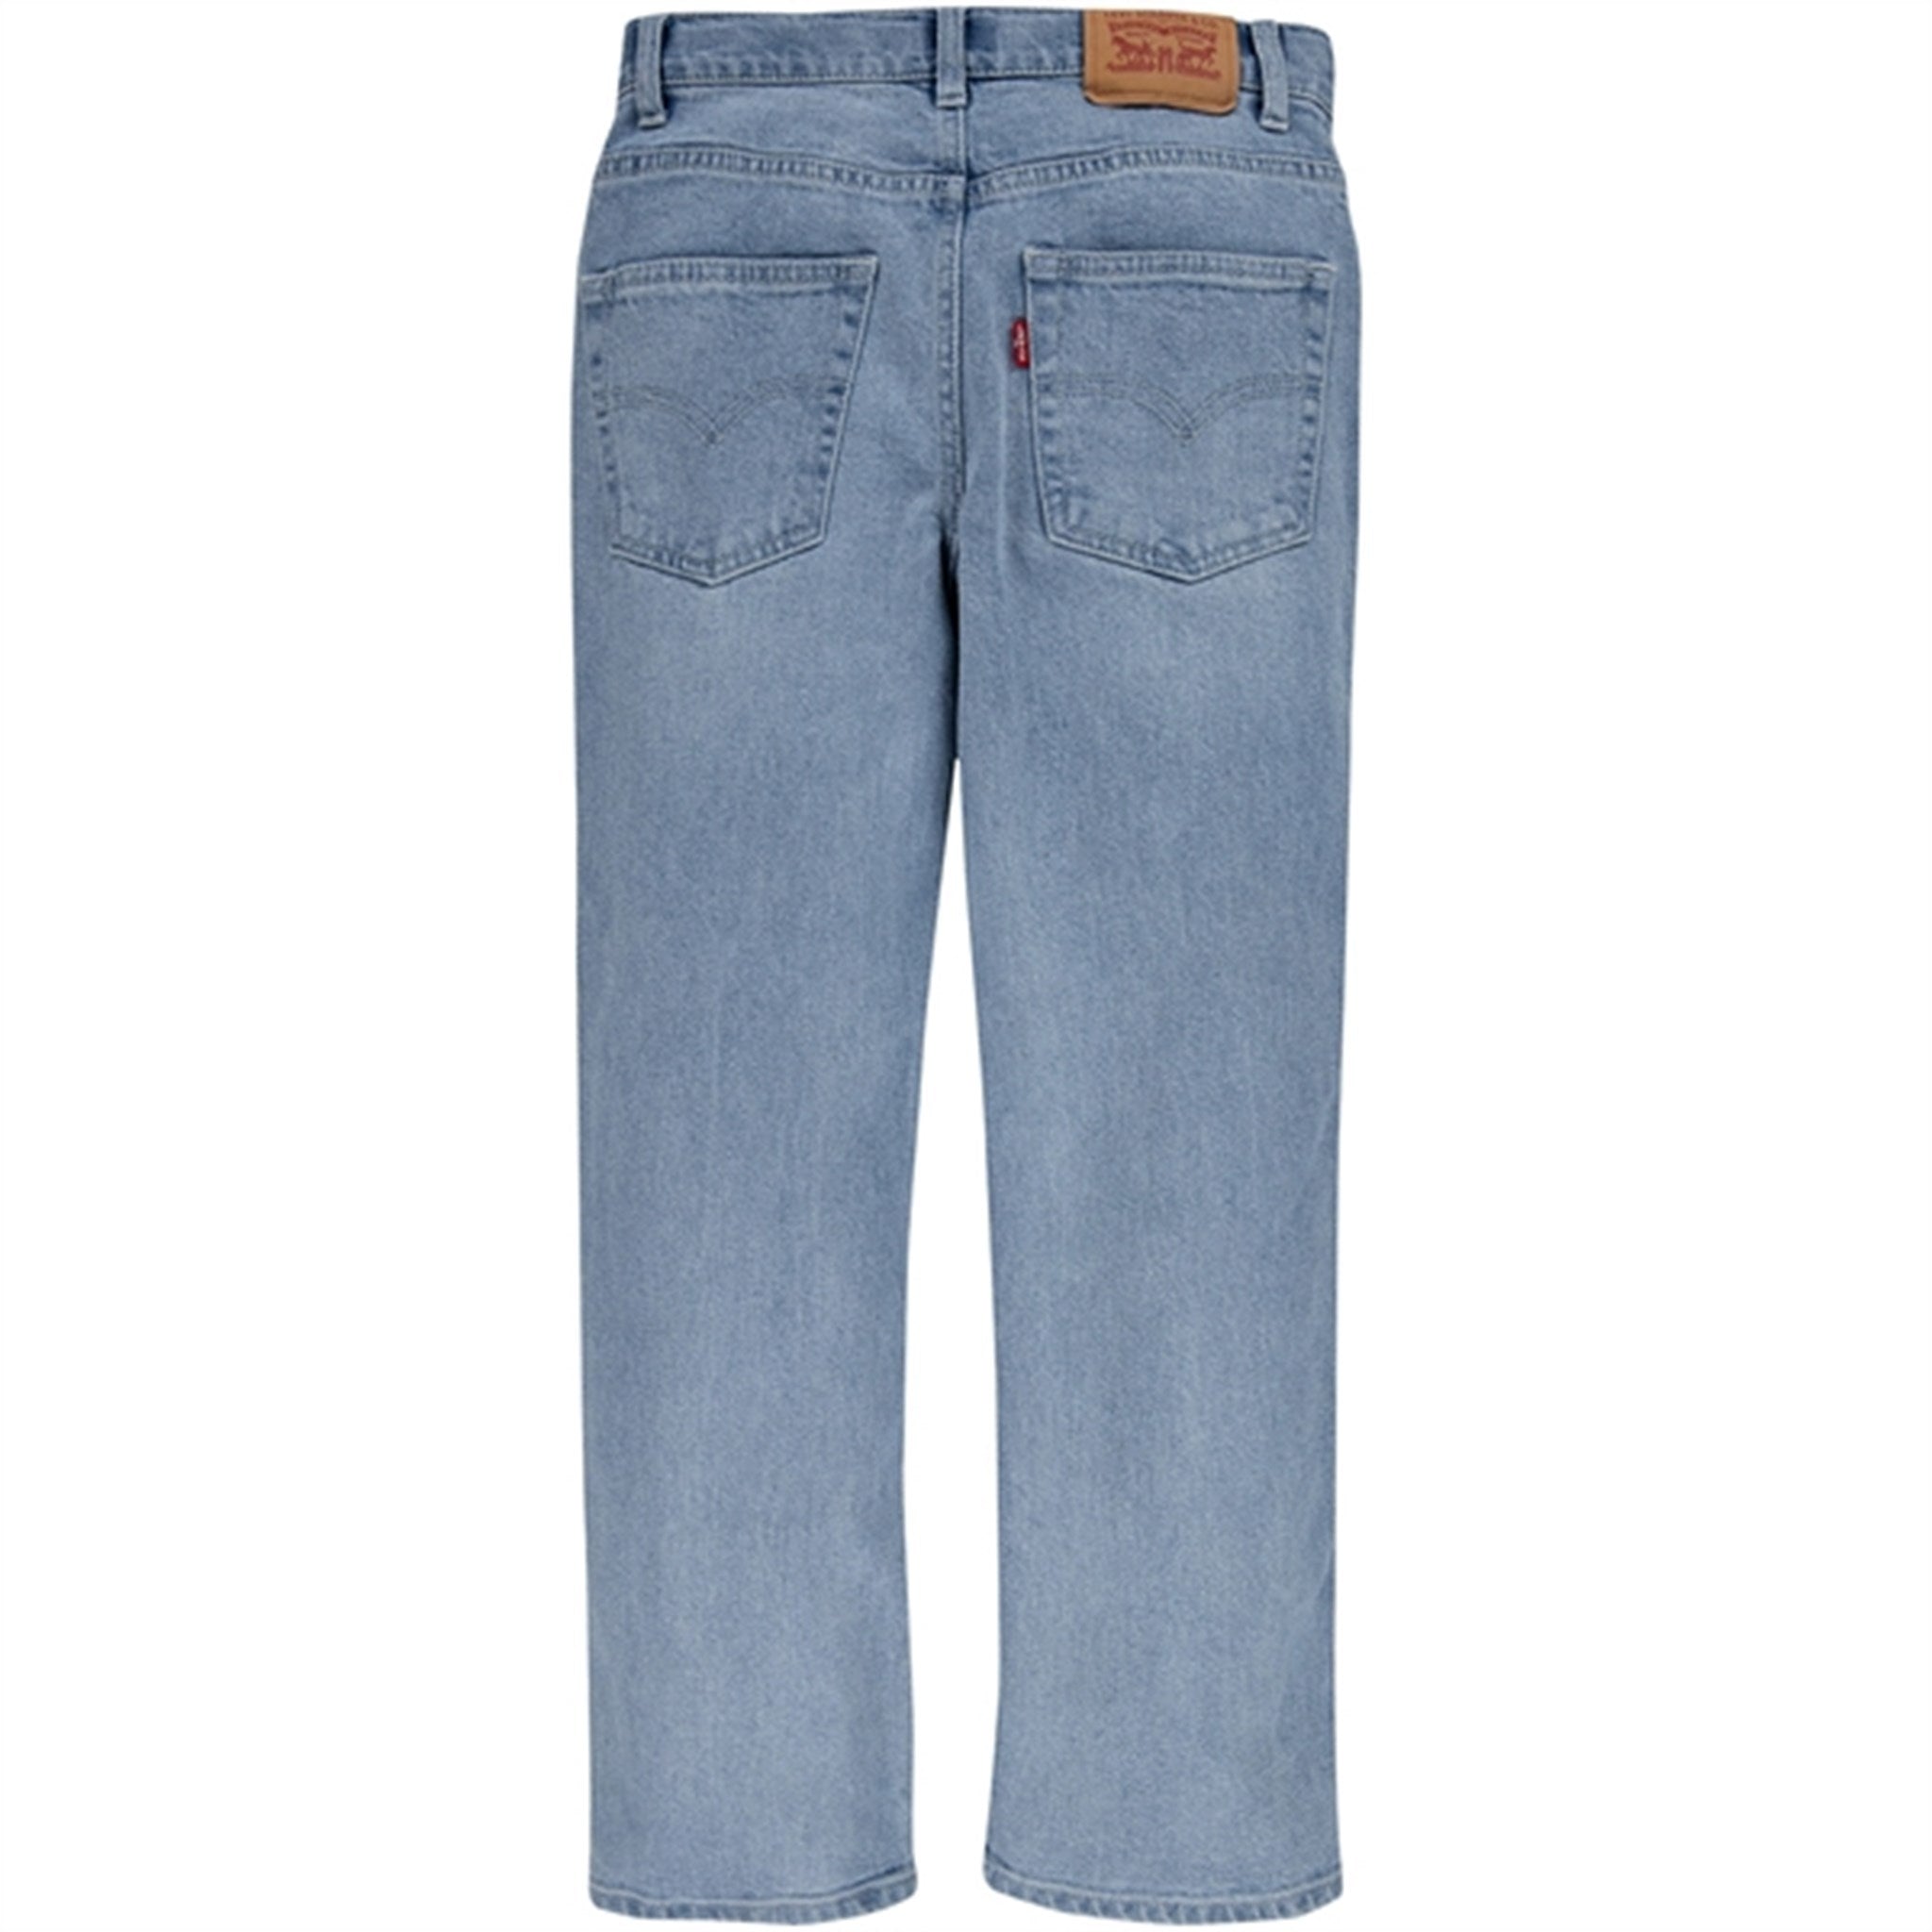 Levi's 551Z Authentic Straight Stretch Jeans Make Me 2